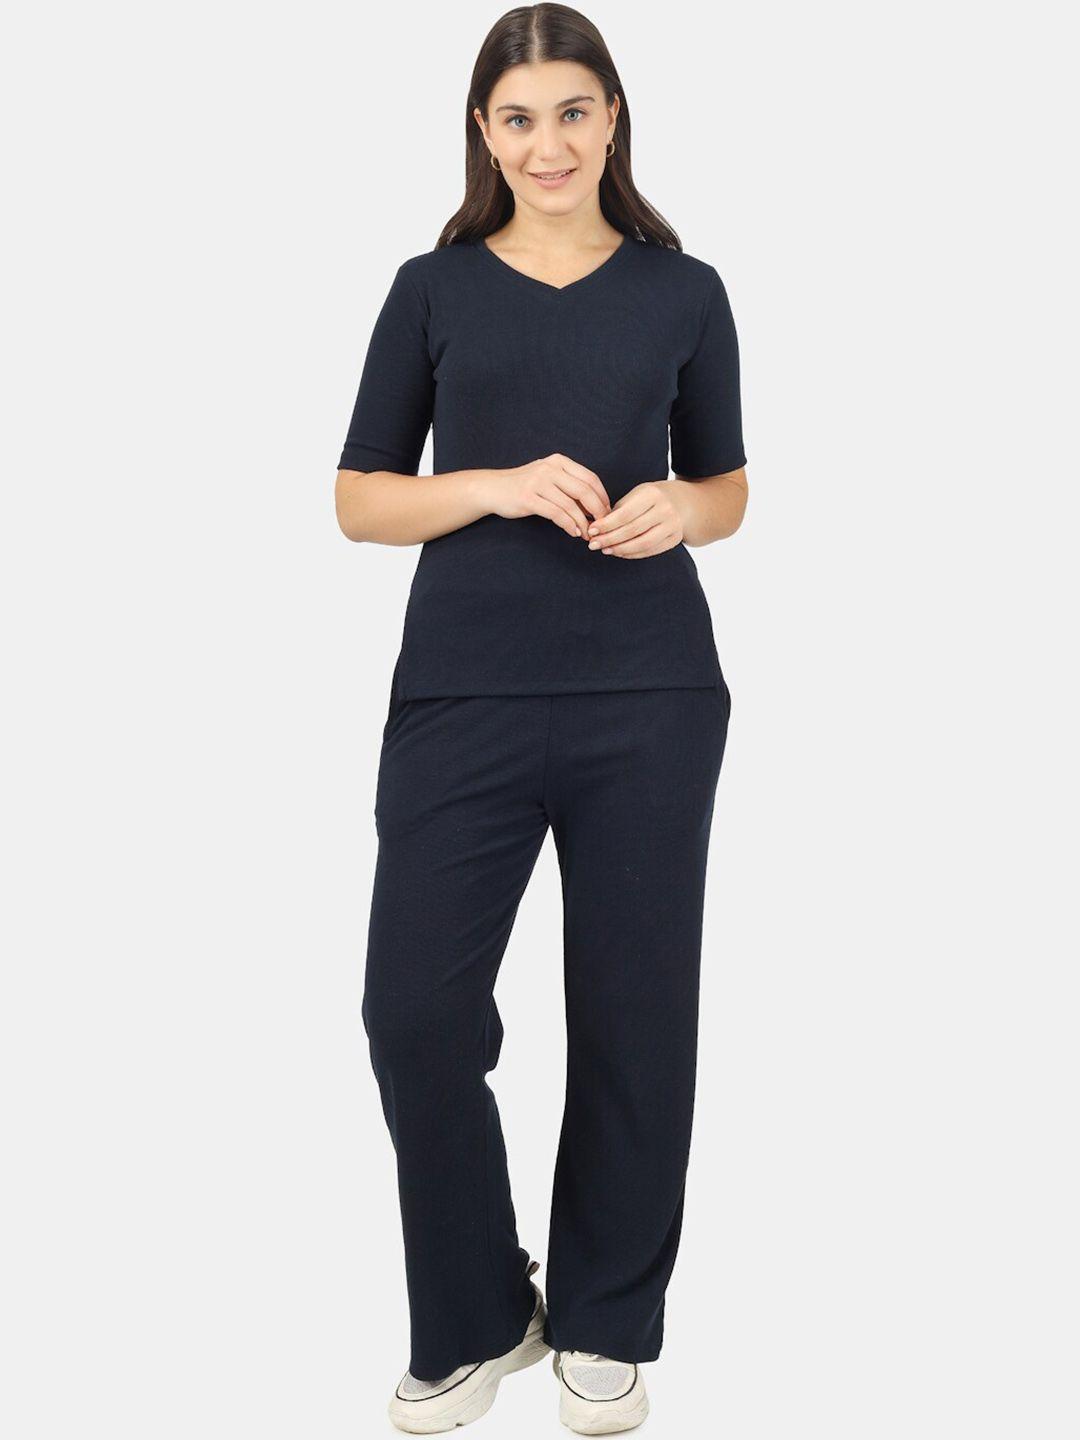 baesd v-neck top with trouser